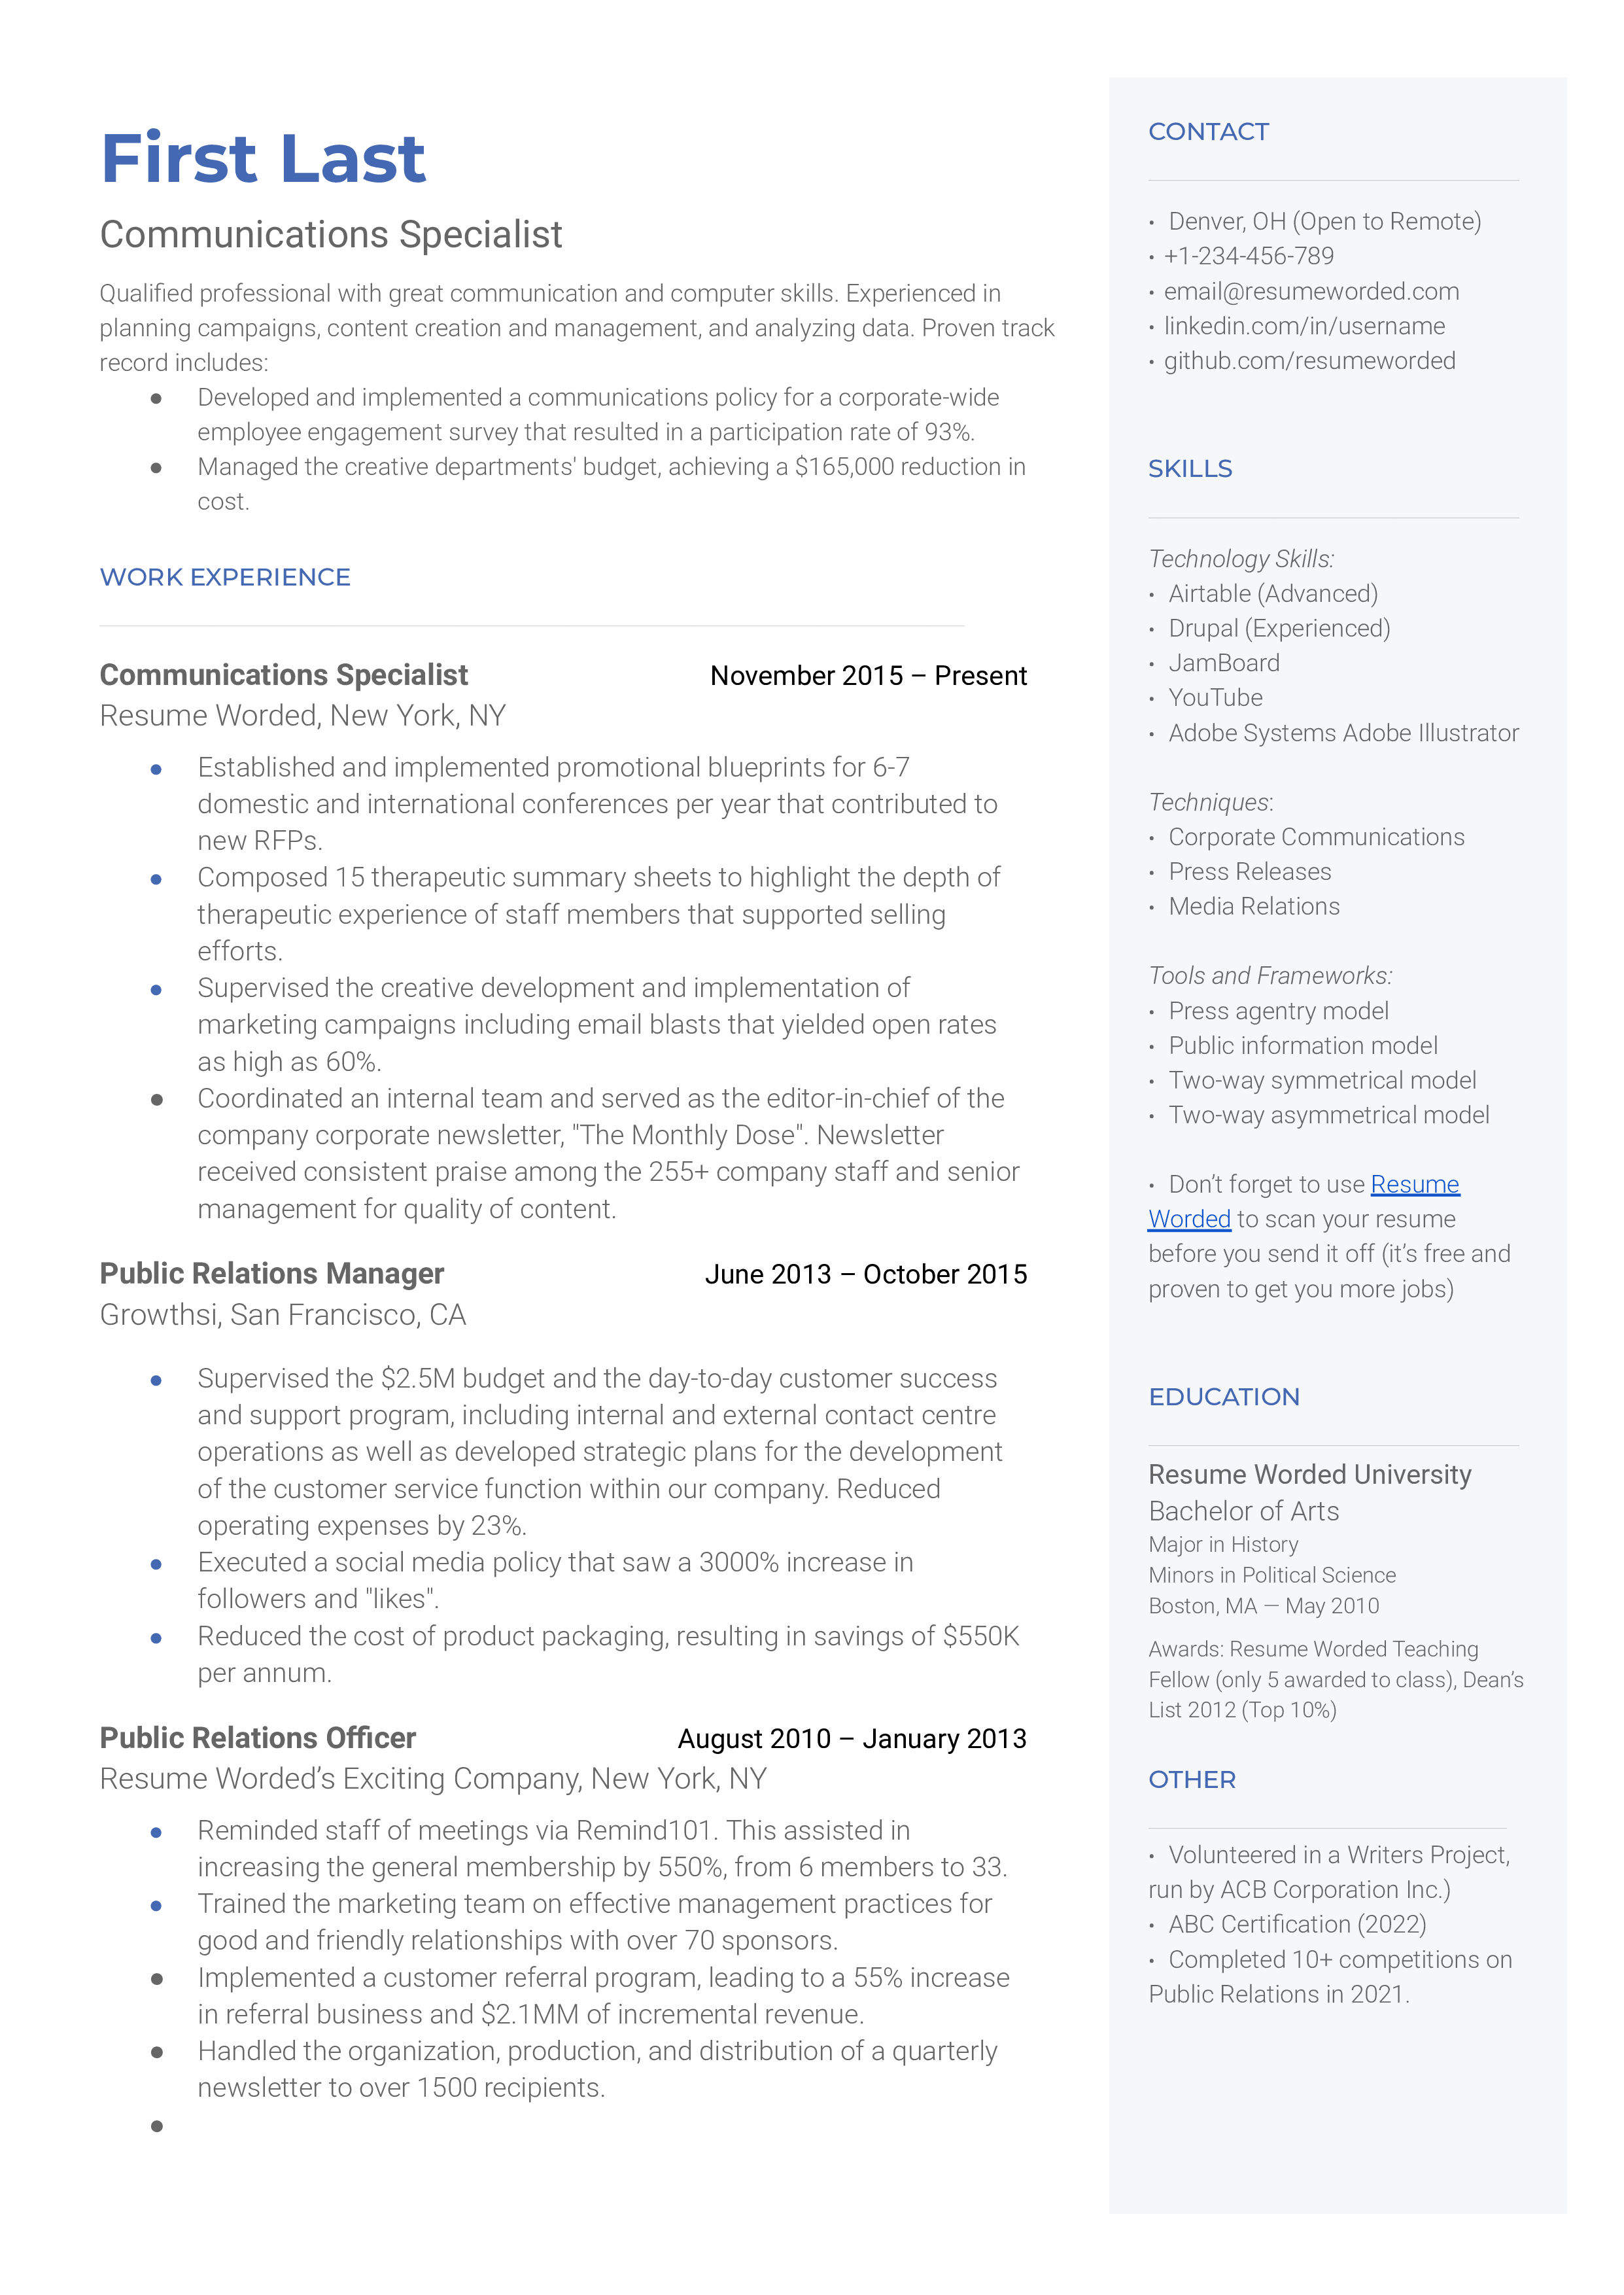 A communications specialist resume that highlights their skills and daily activities for an organization’s communications department